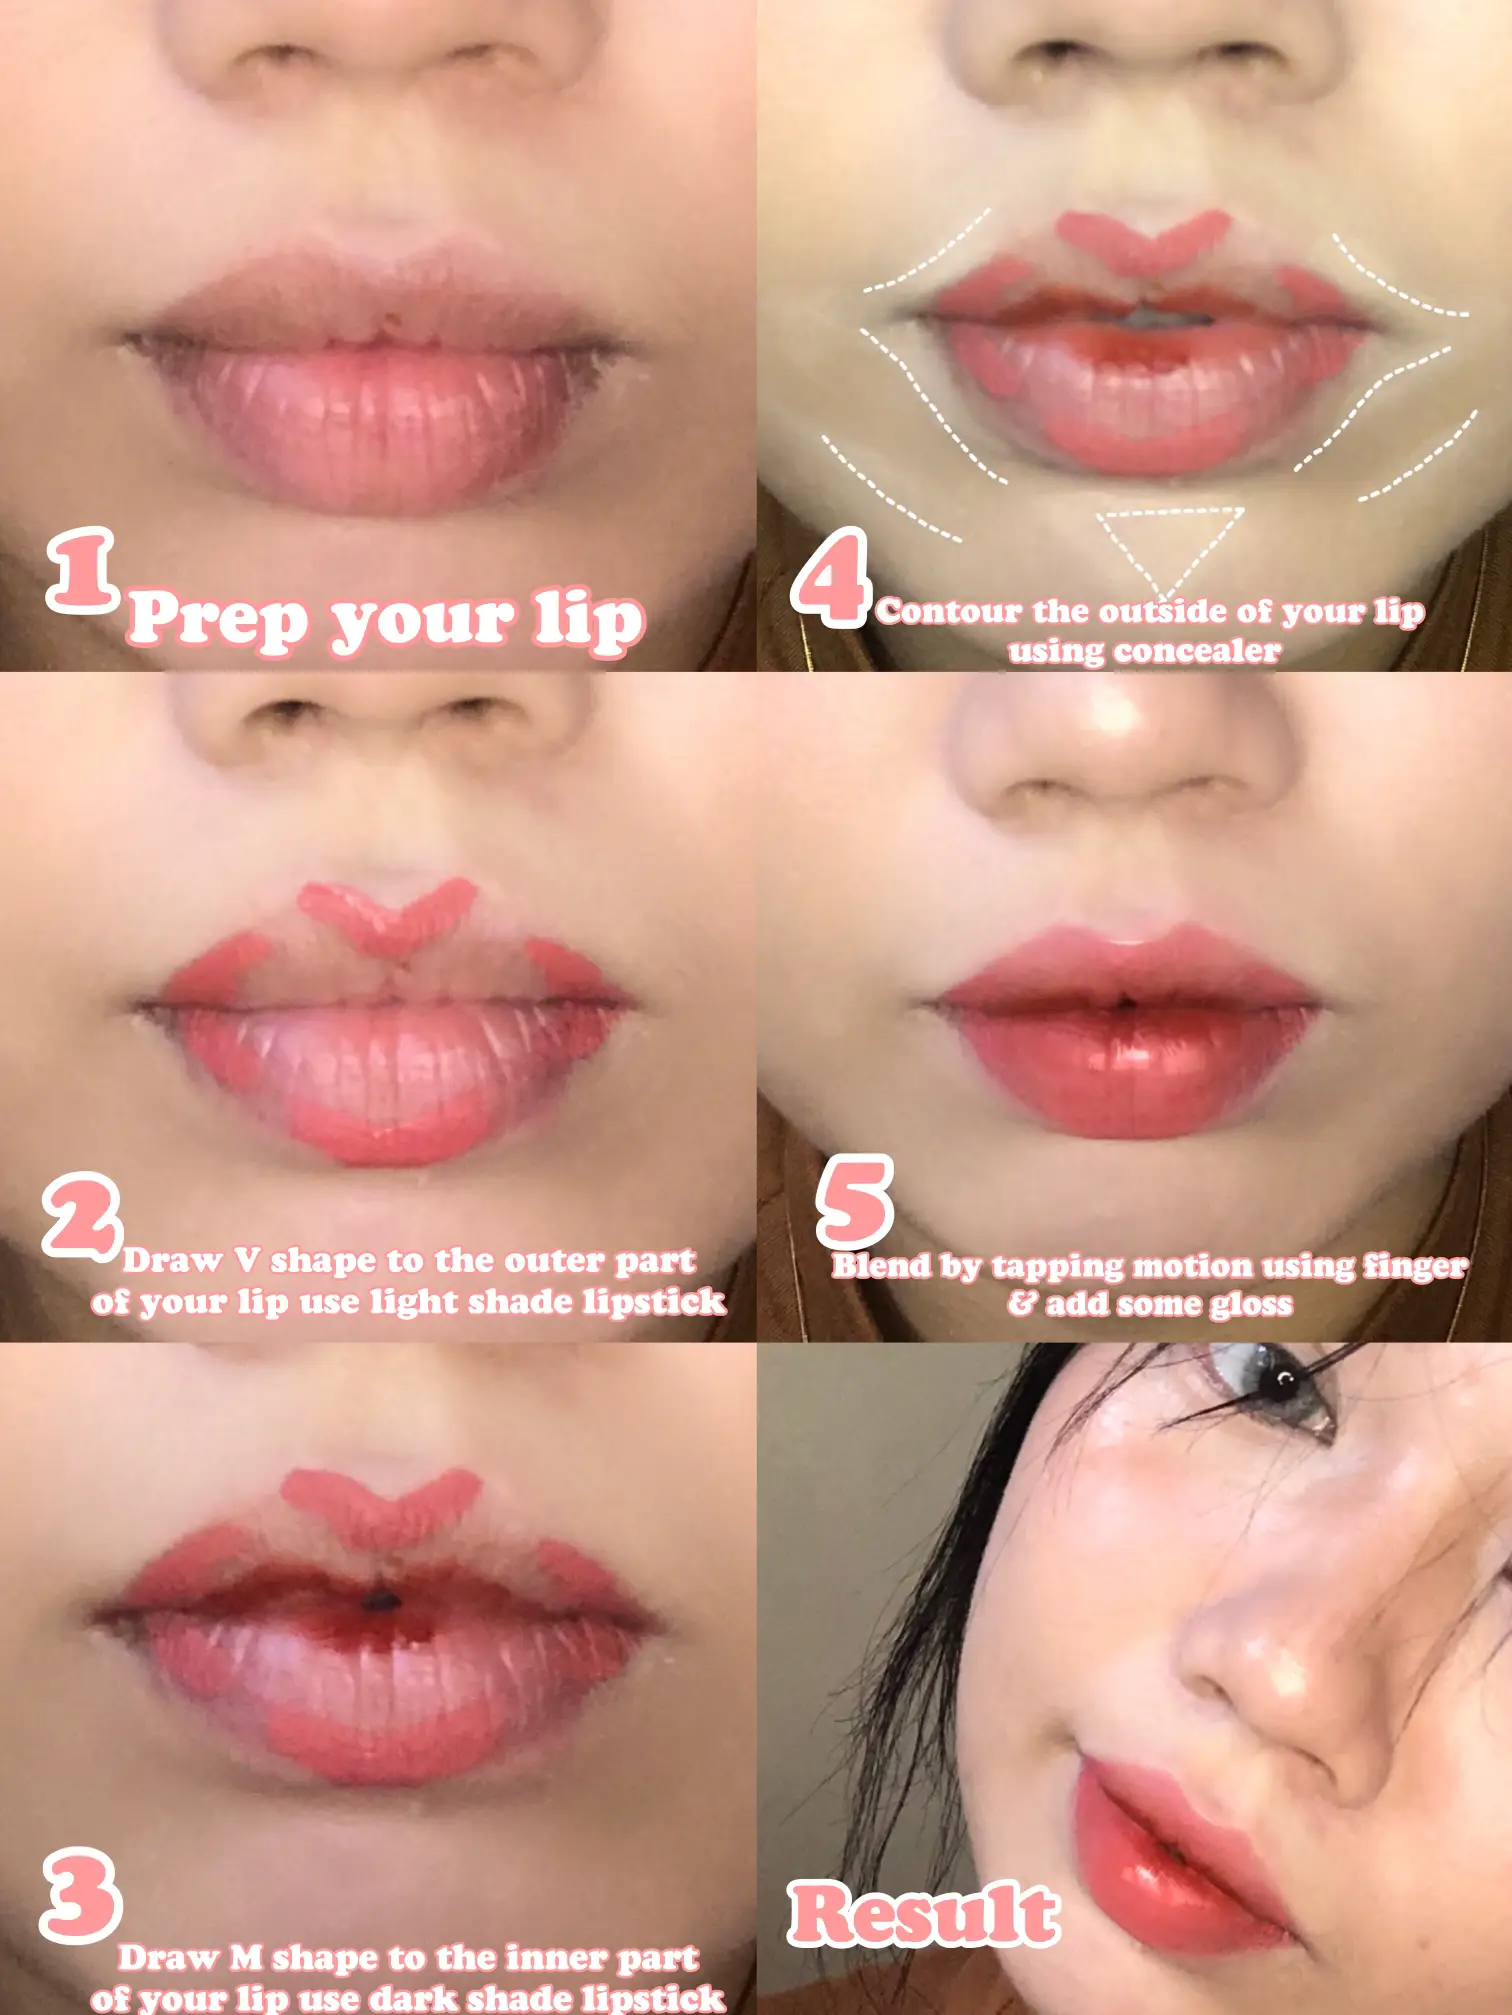 Where Does Your Cupid's Bow Really Come From?